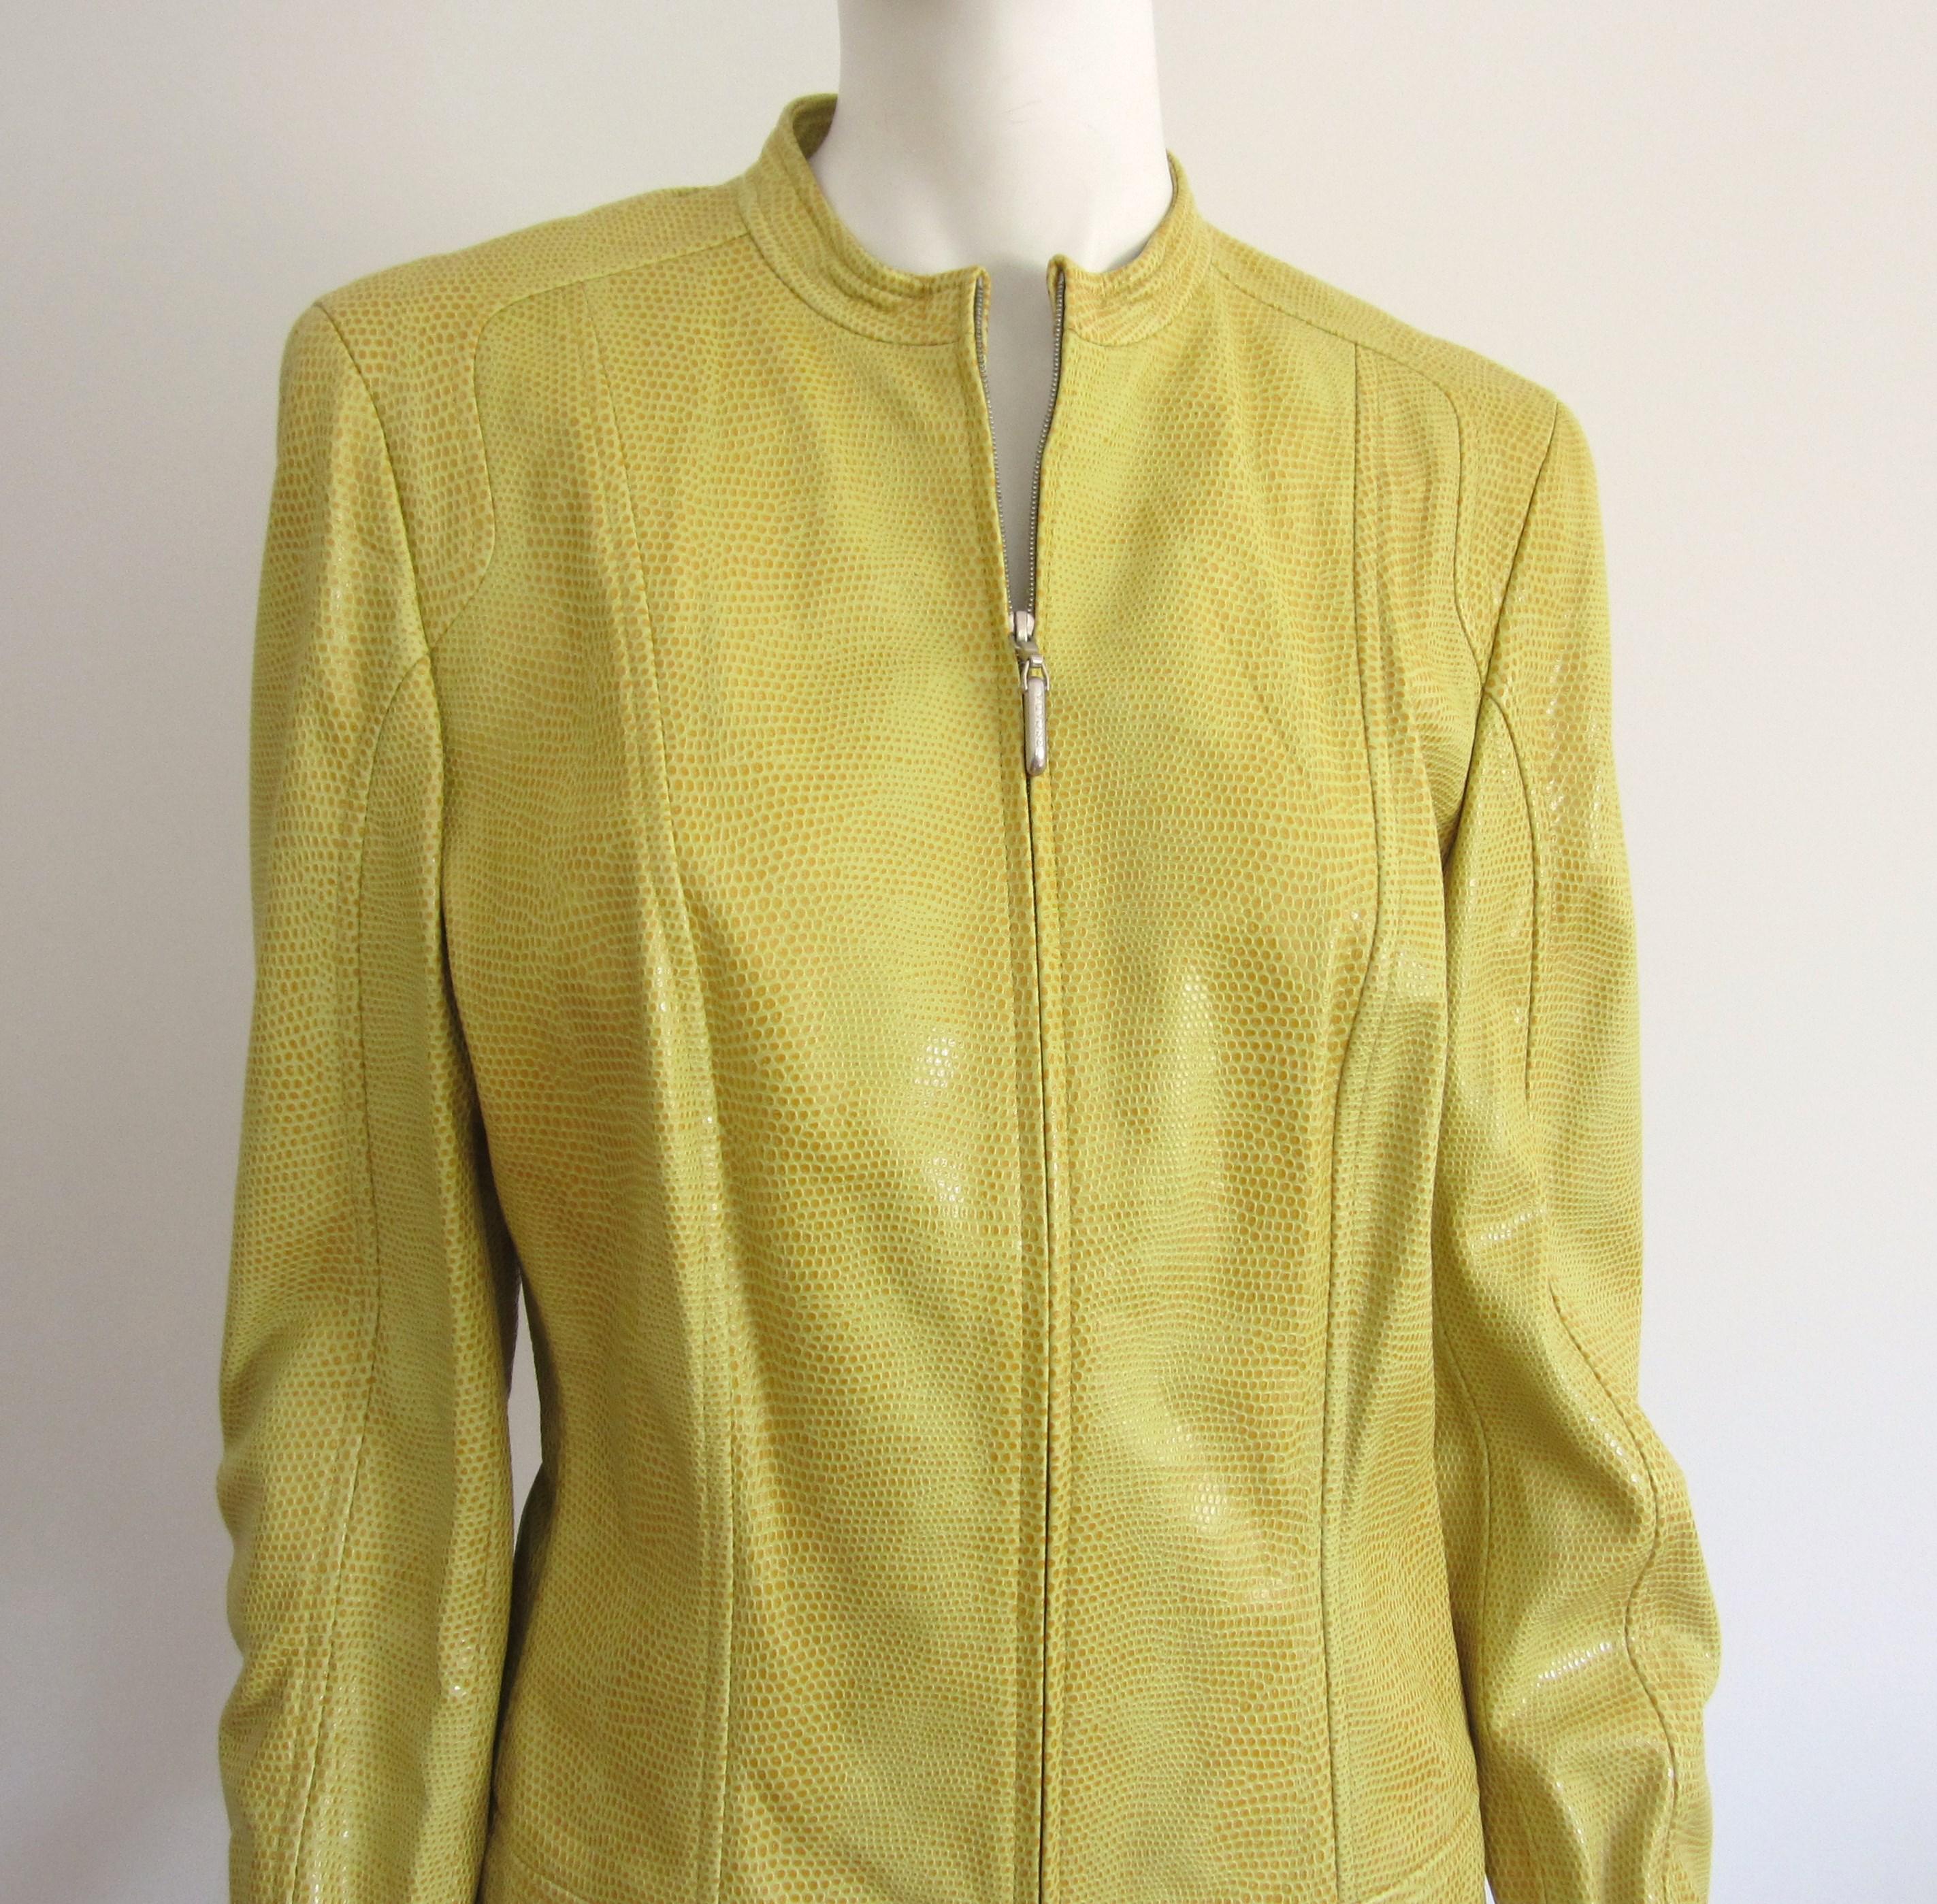 Yellow Reptile Embossed Leather Fitted Jacket New With Tags from the 1990s. Zippered front, with zippered arms. Measuring up to 38 in. waist- Up to 34-inch waist-- 24-inch sleeve -- 22.5 inches long. Labeled a 38. WIll fit an 8-10. Please refer to